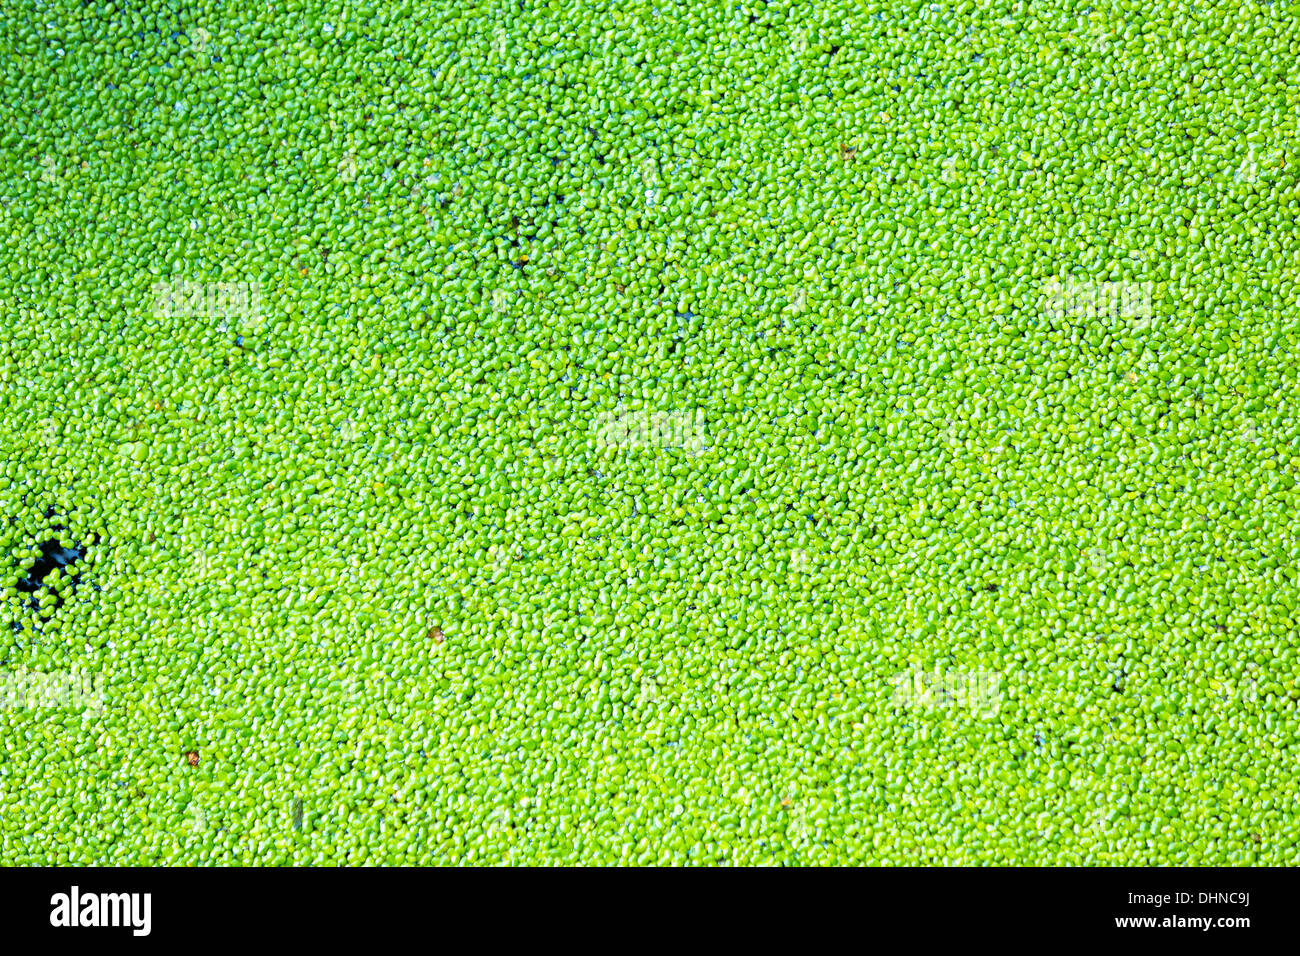 Duckweed on the surface of the pond water Stock Photo